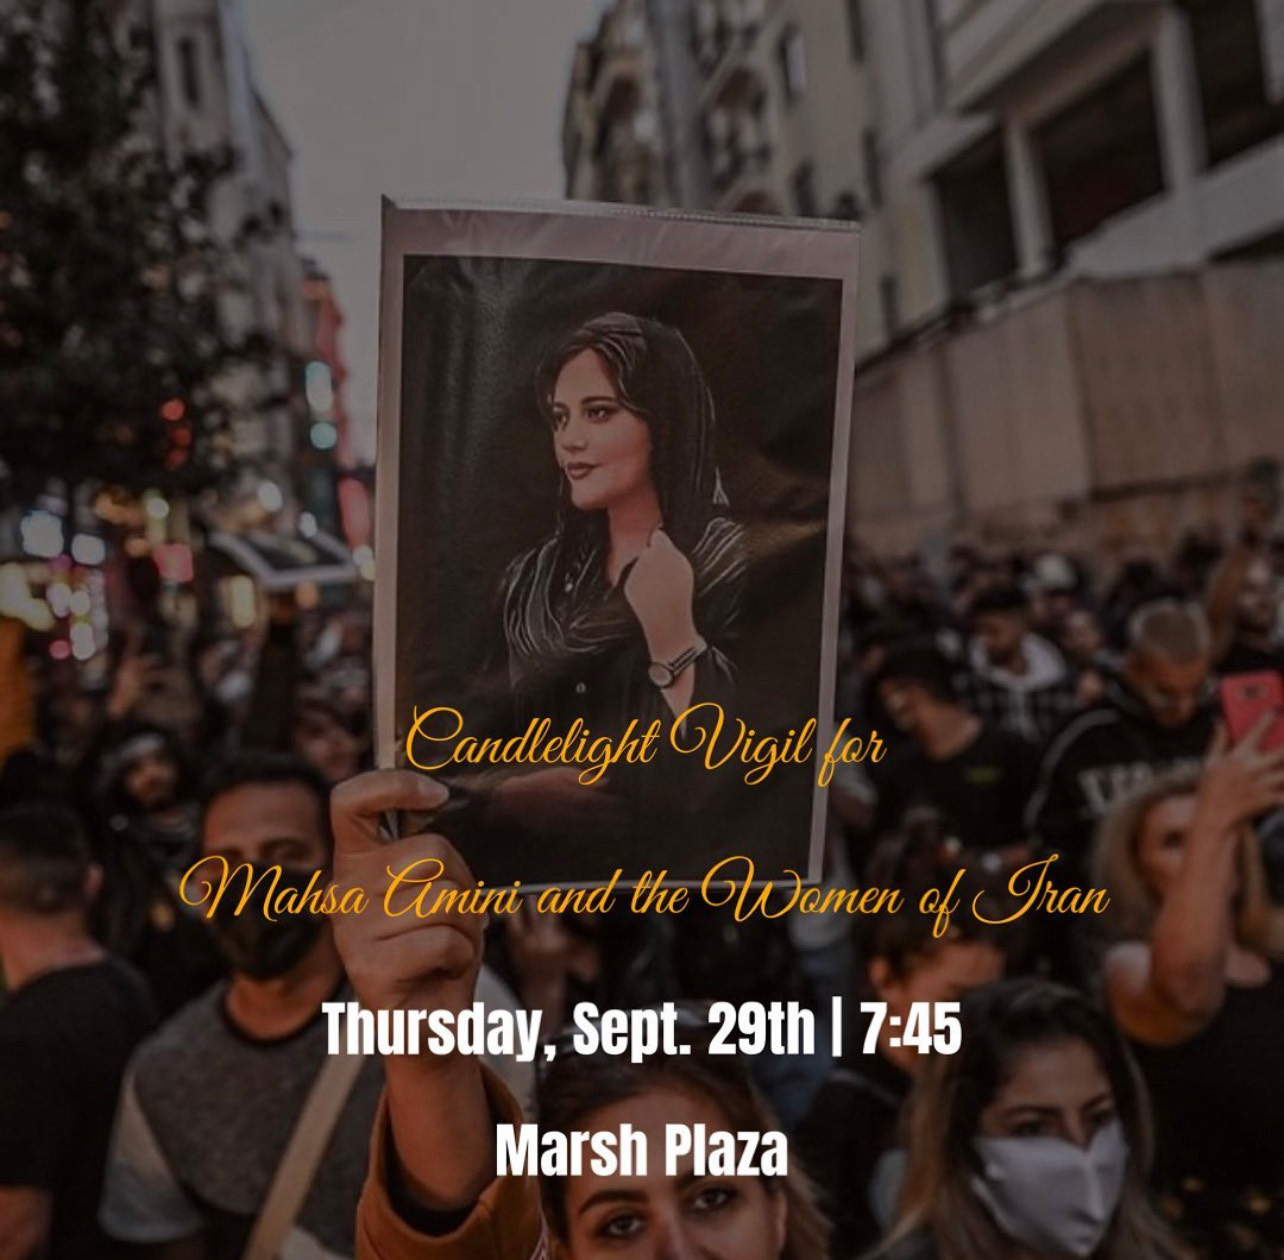 Image: Poster advertising the September 29th candlelight vigil on BU's Campus for Mahsa Amini. Image reads "Candlelight vigil for Mahsa Amini and the women of Iran. Thurs, Sept. 29th at 7:45 pm on Marsh Plaza"